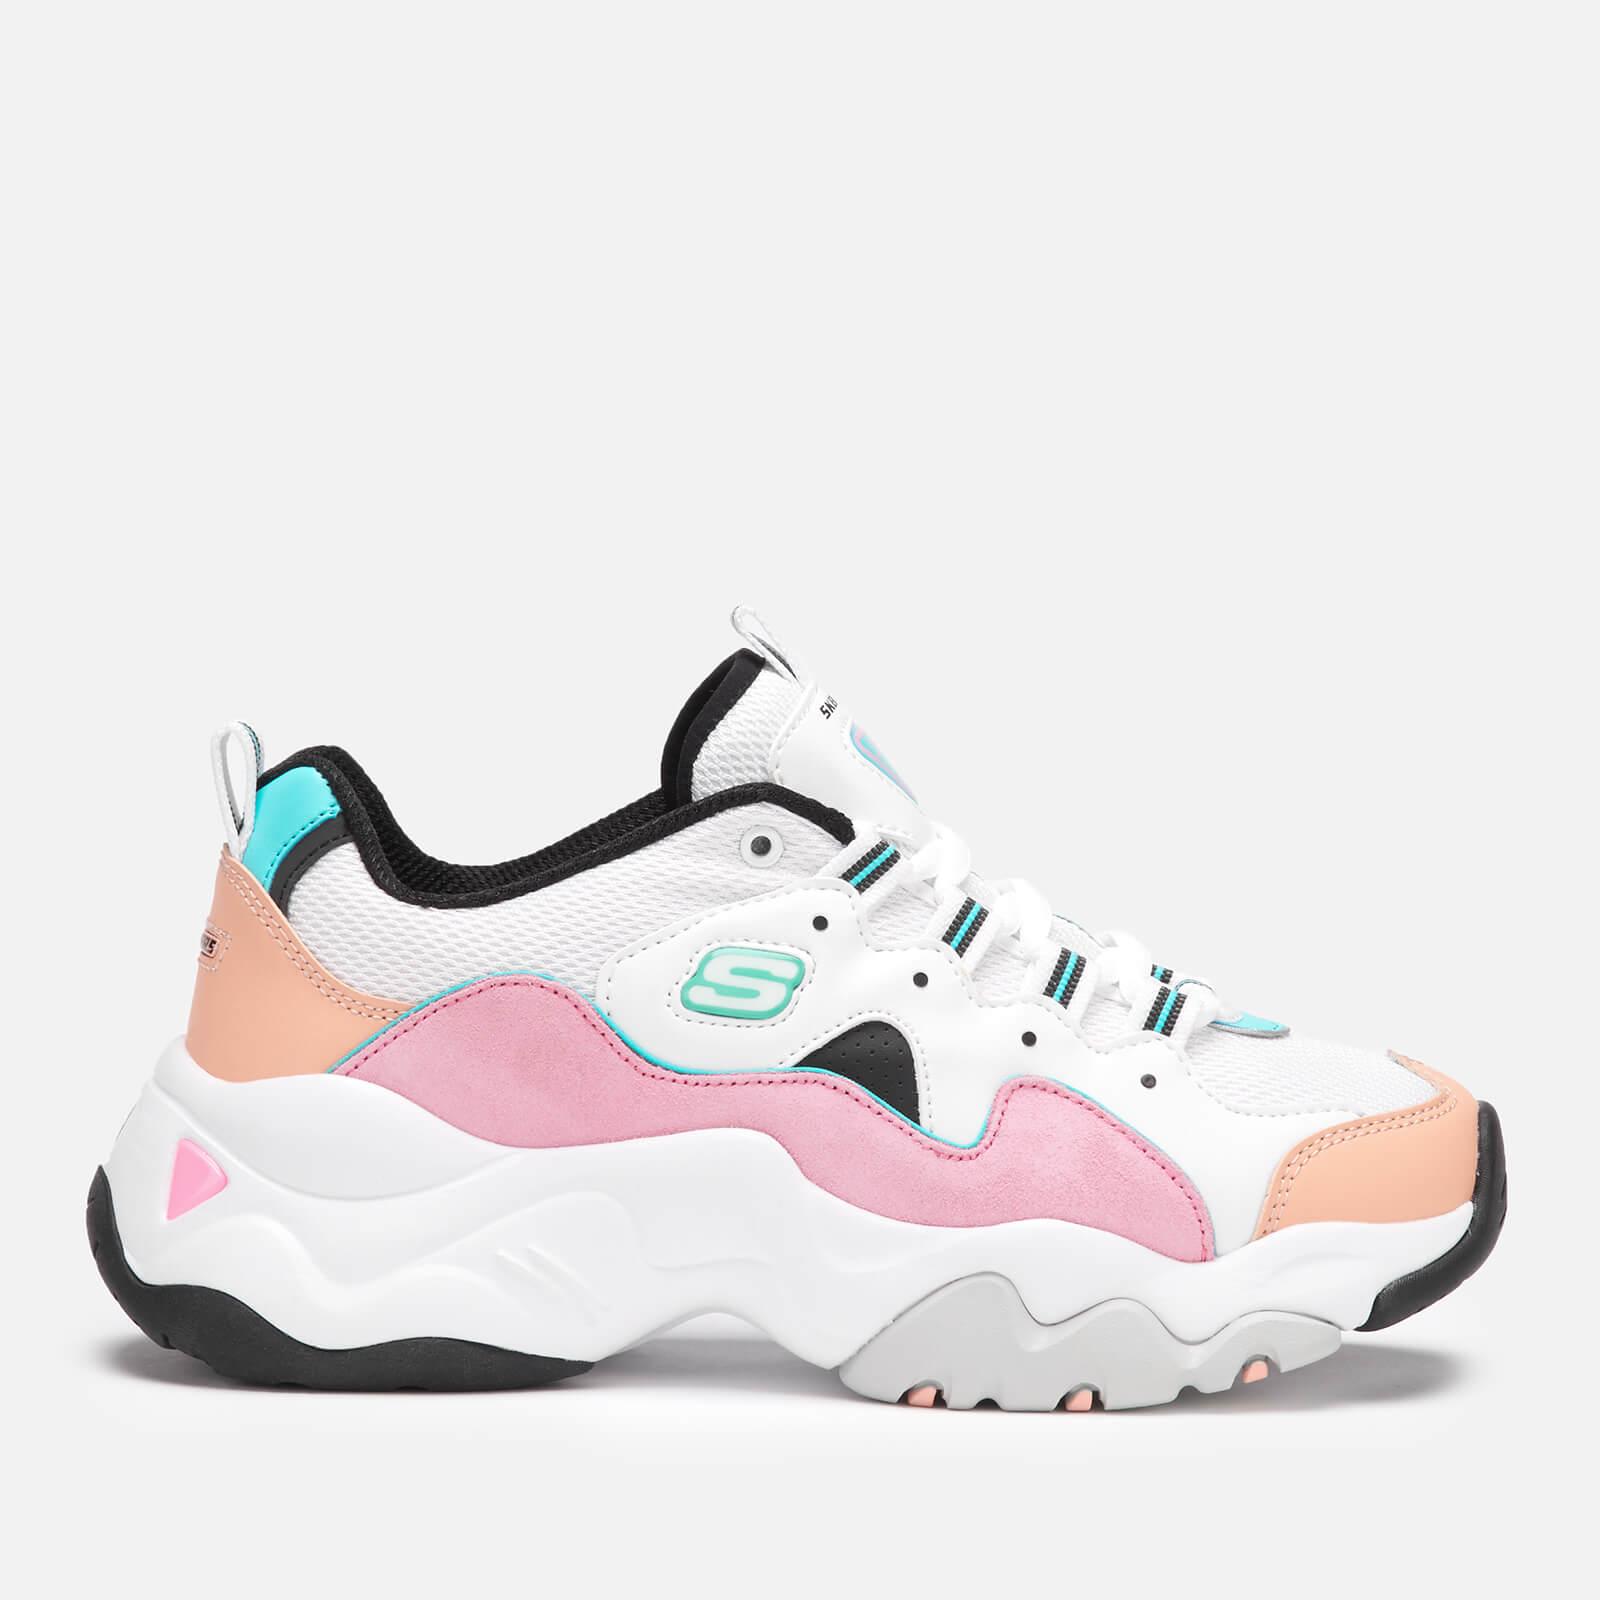 Skechers D'lite Chunky Trainers 3.0 In Pastel | Lyst